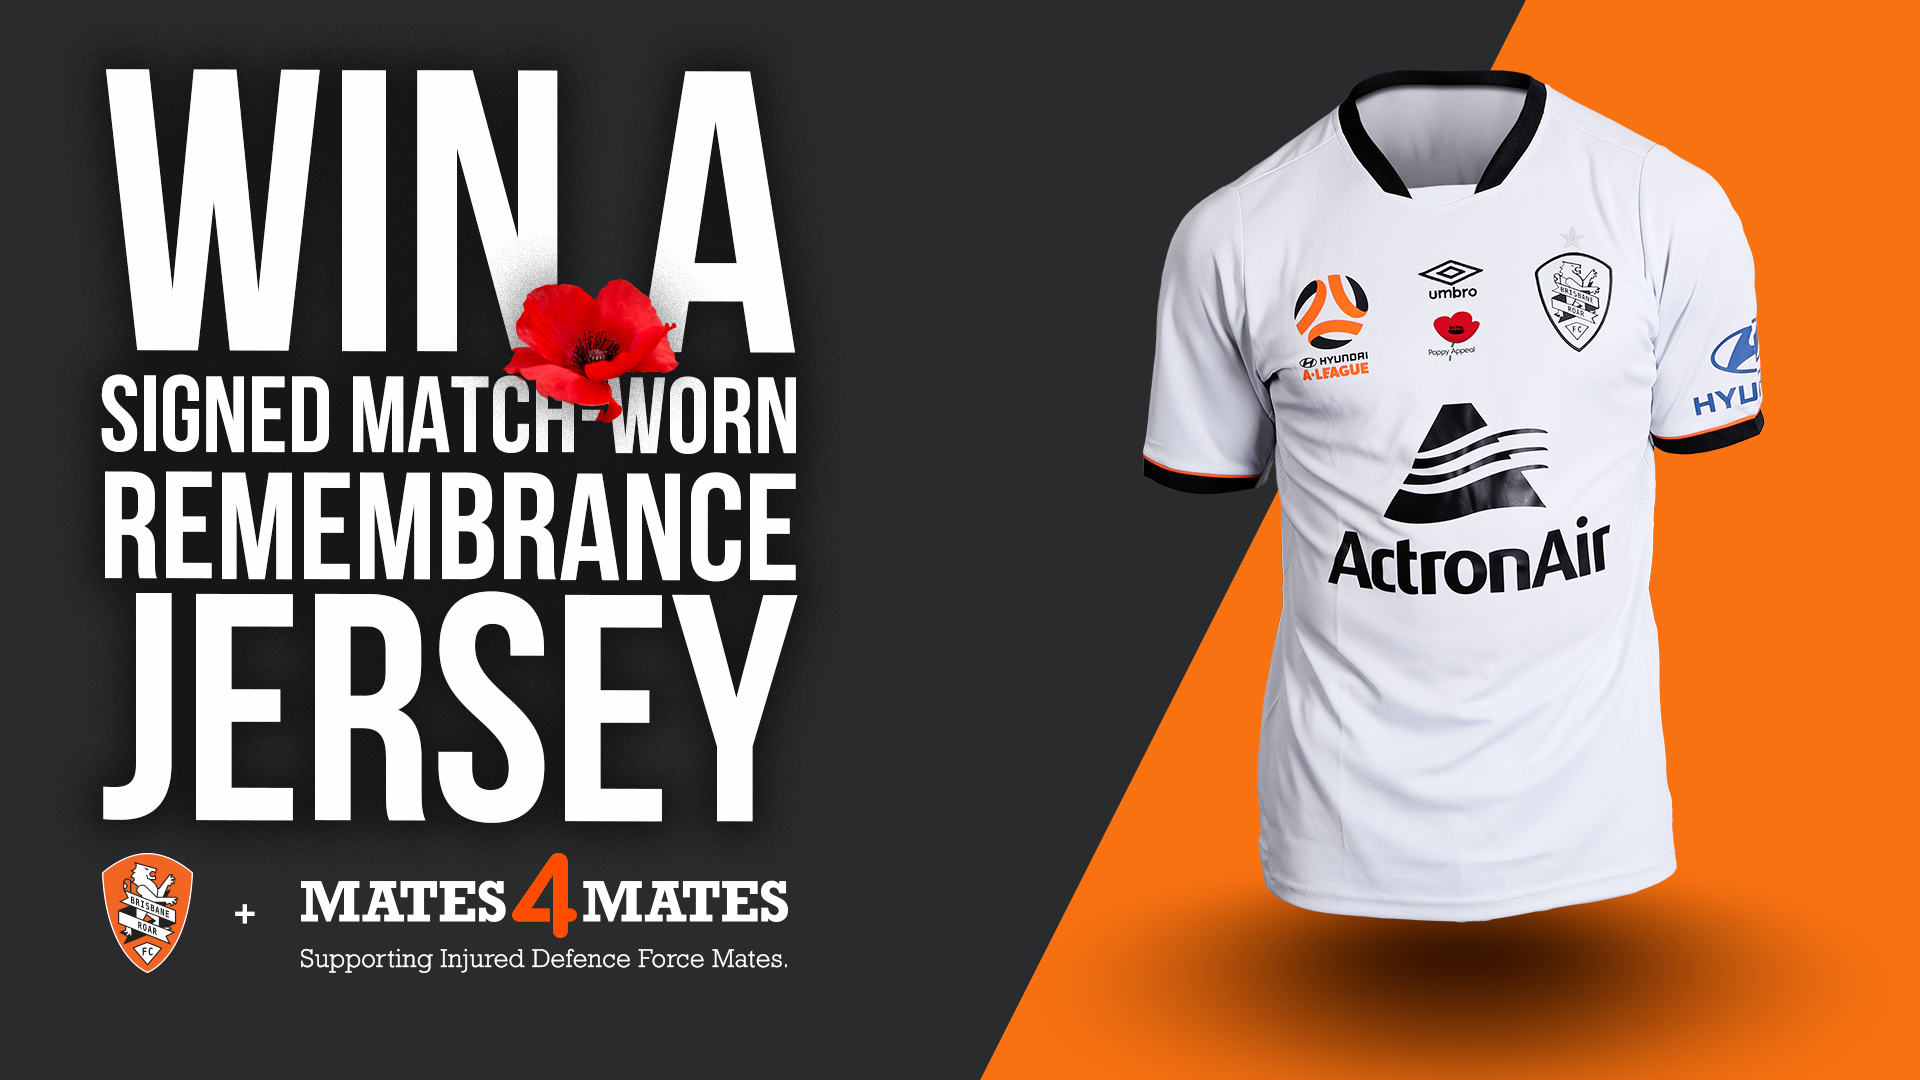 Win a signed, match-worn Remembrance Jersey!